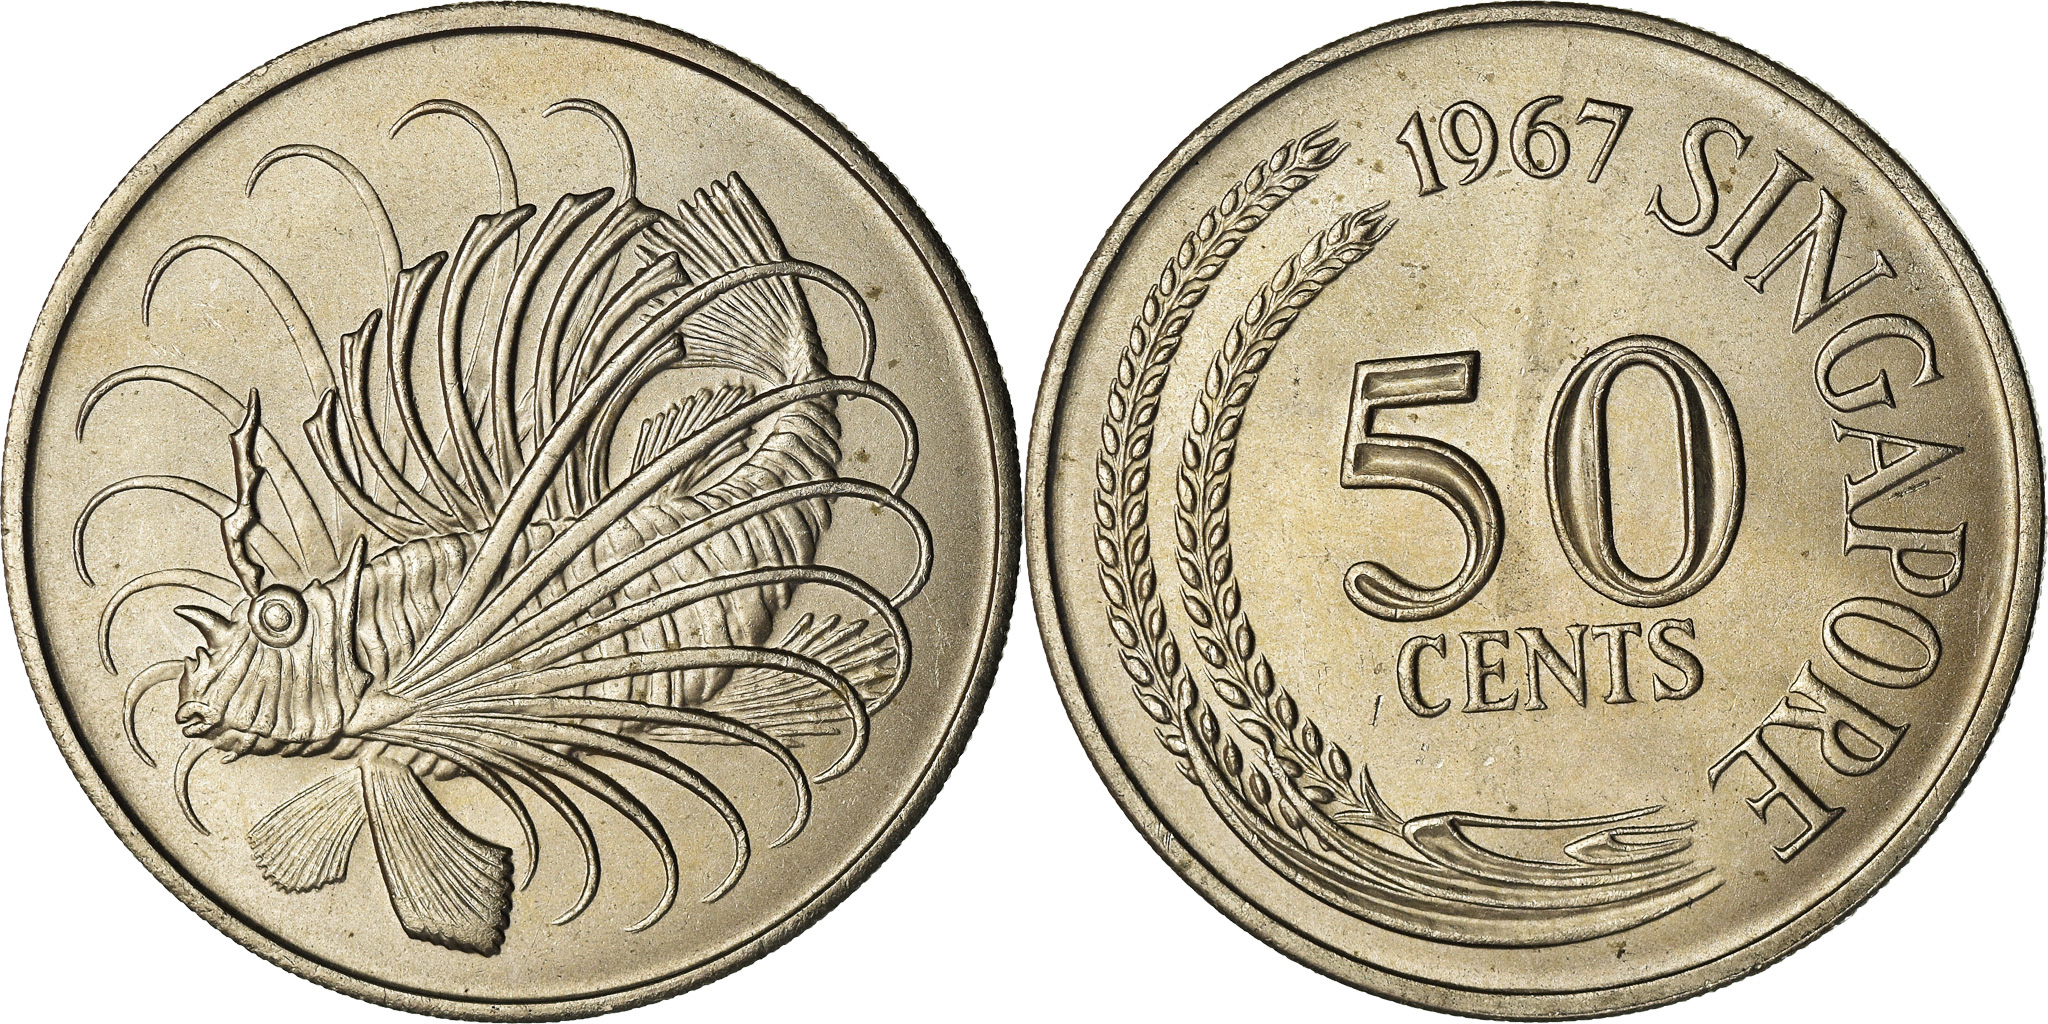 The Singapore Mint is established